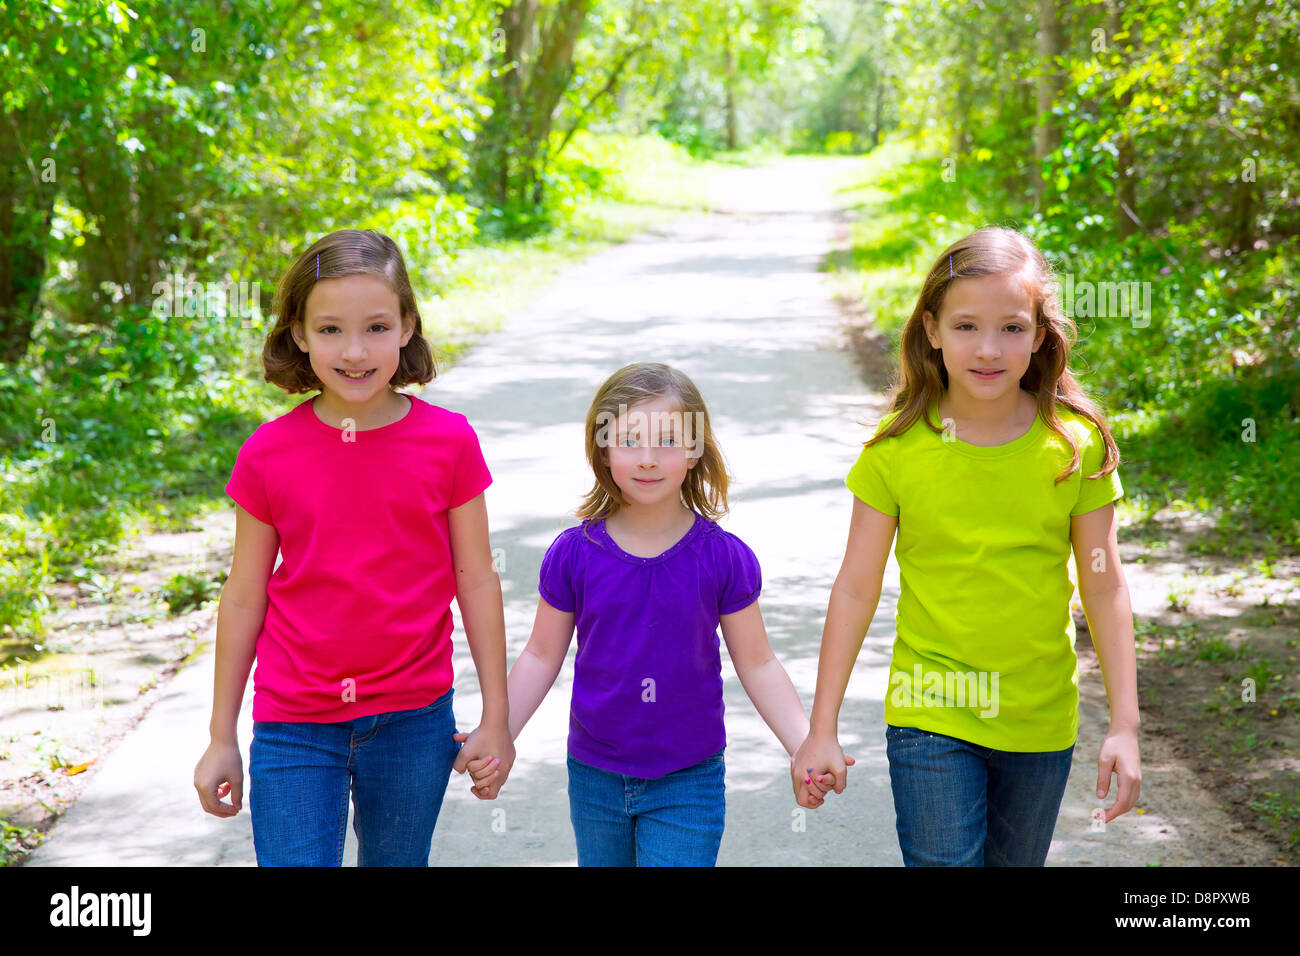 Friends and sister girls walking outdoor in forest track excursion Stock Photo